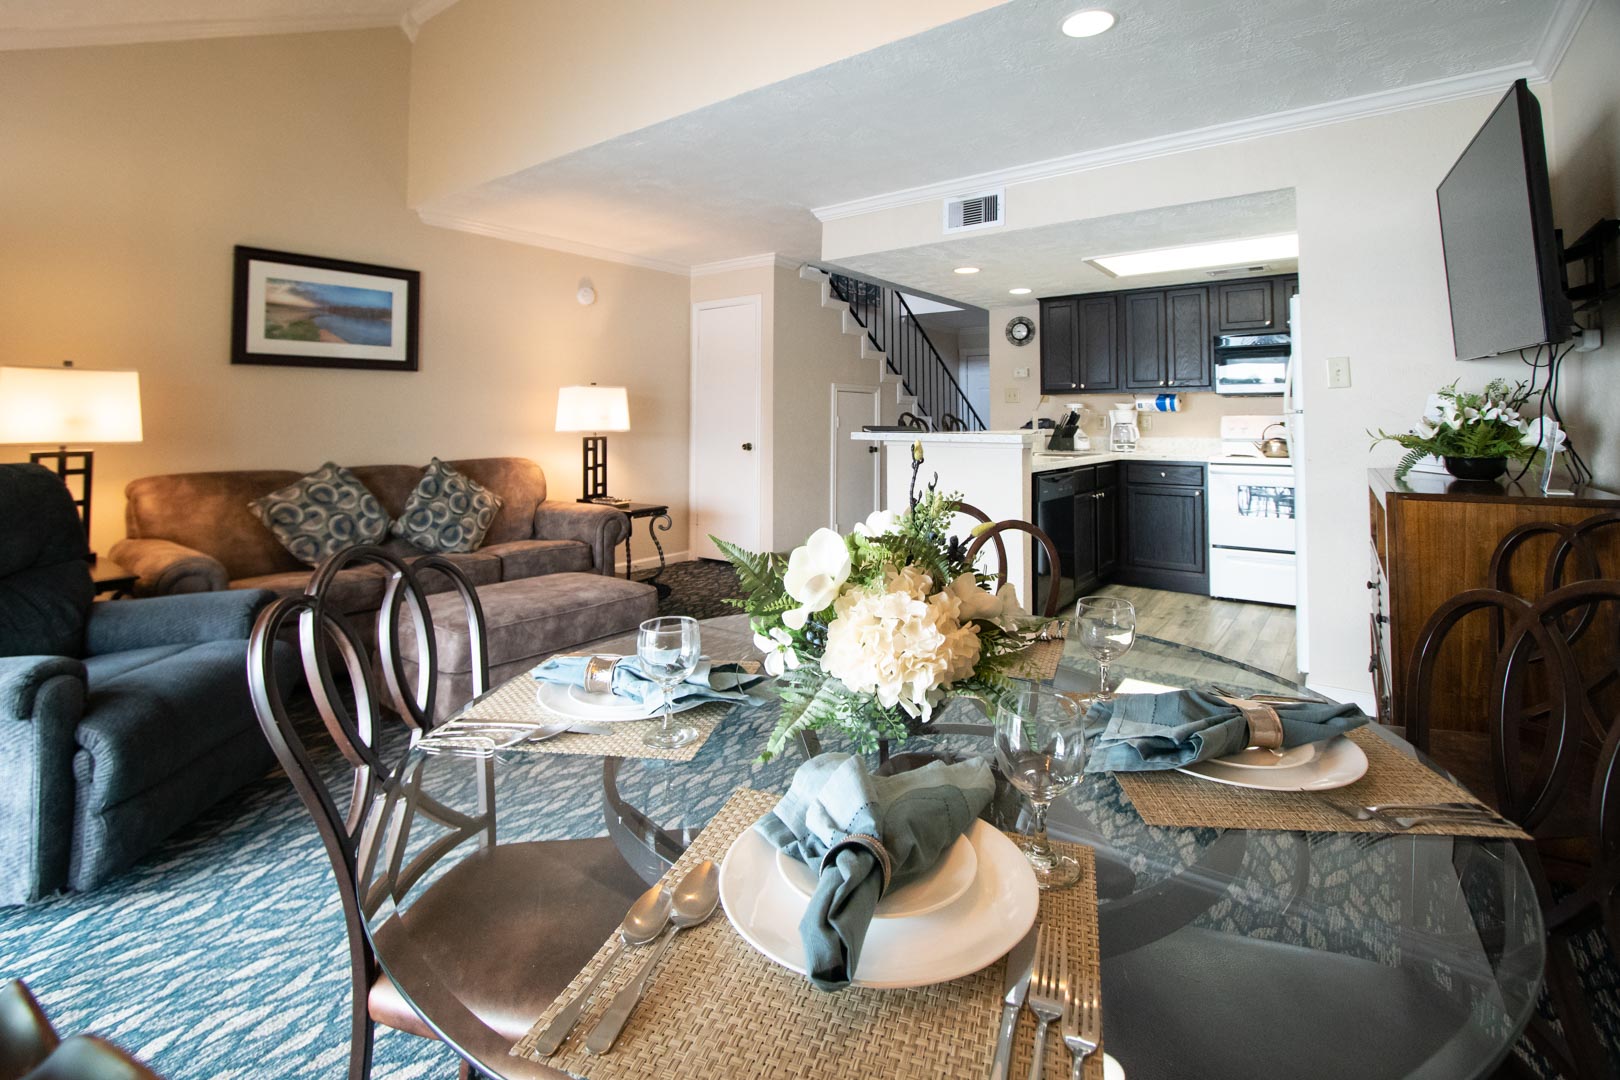 A fully equipped condominiums at VRI's The Landing at Seven Coves in Willis, Texas.